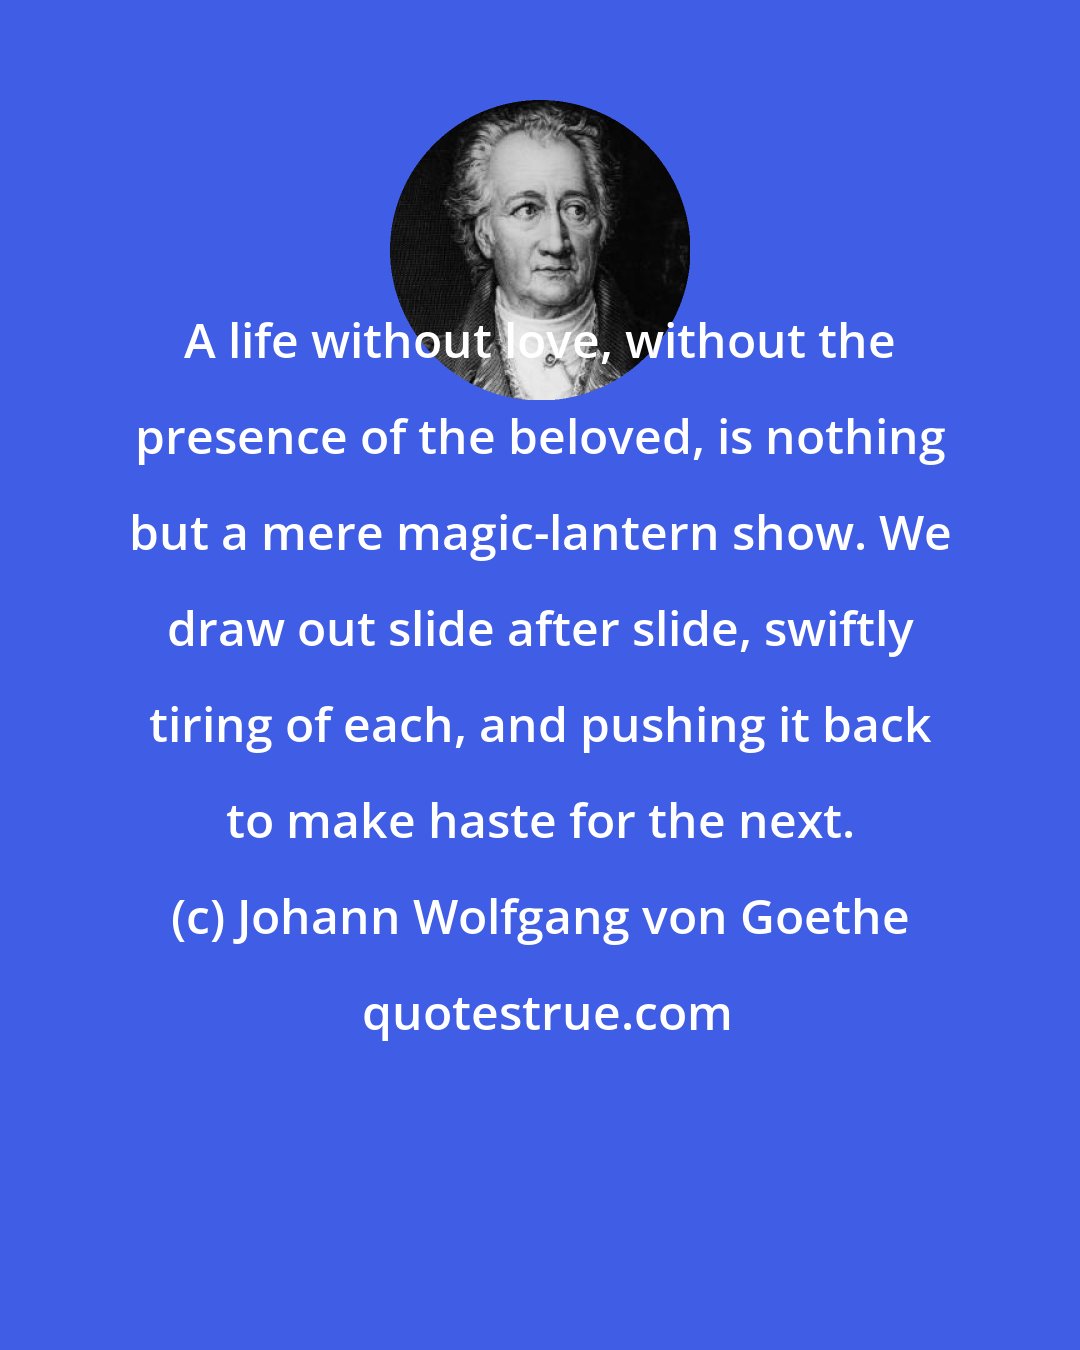 Johann Wolfgang von Goethe: A life without love, without the presence of the beloved, is nothing but a mere magic-lantern show. We draw out slide after slide, swiftly tiring of each, and pushing it back to make haste for the next.